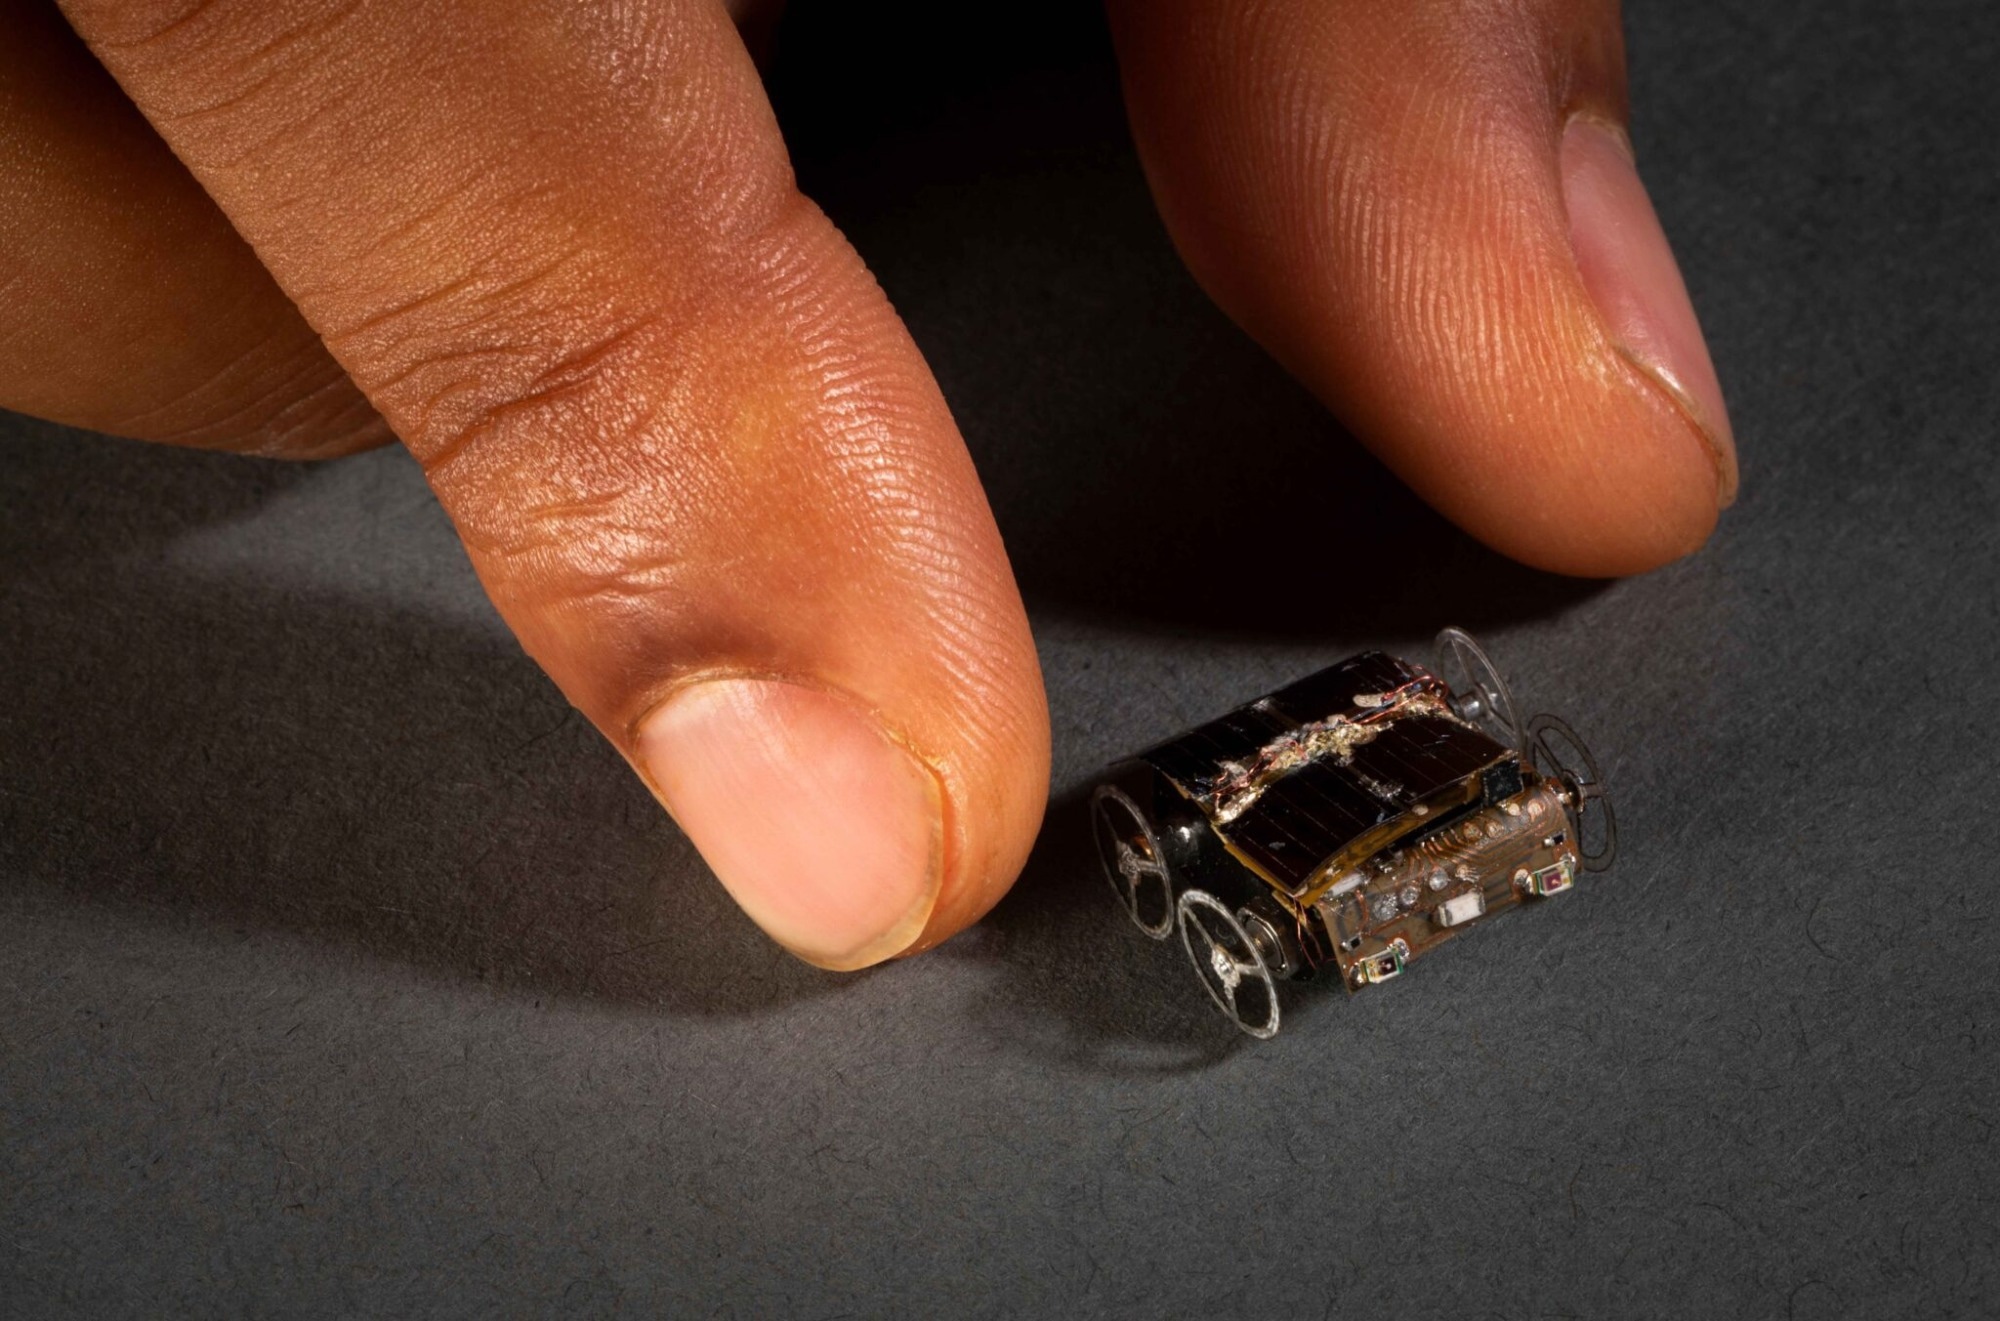 MilliMobile: A Minuscule Self-Driving Robot Fueled by Light and Radio Waves